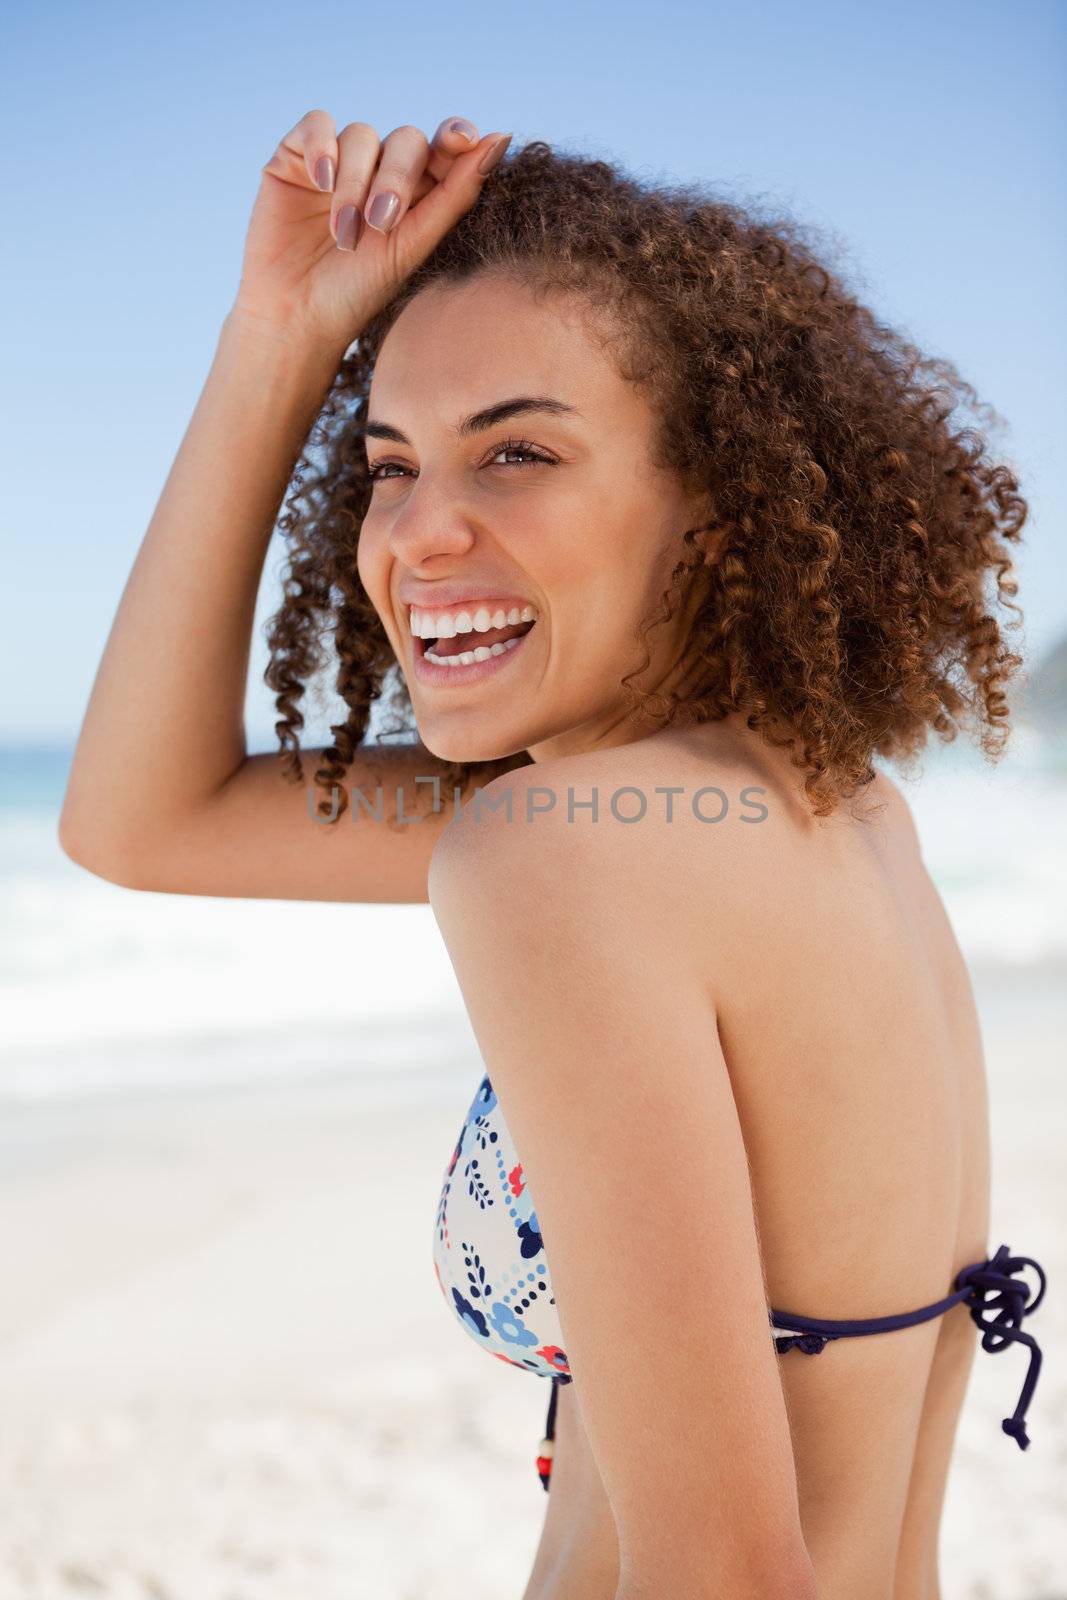 Smiling woman placing her hand on her forehead while standing on by Wavebreakmedia